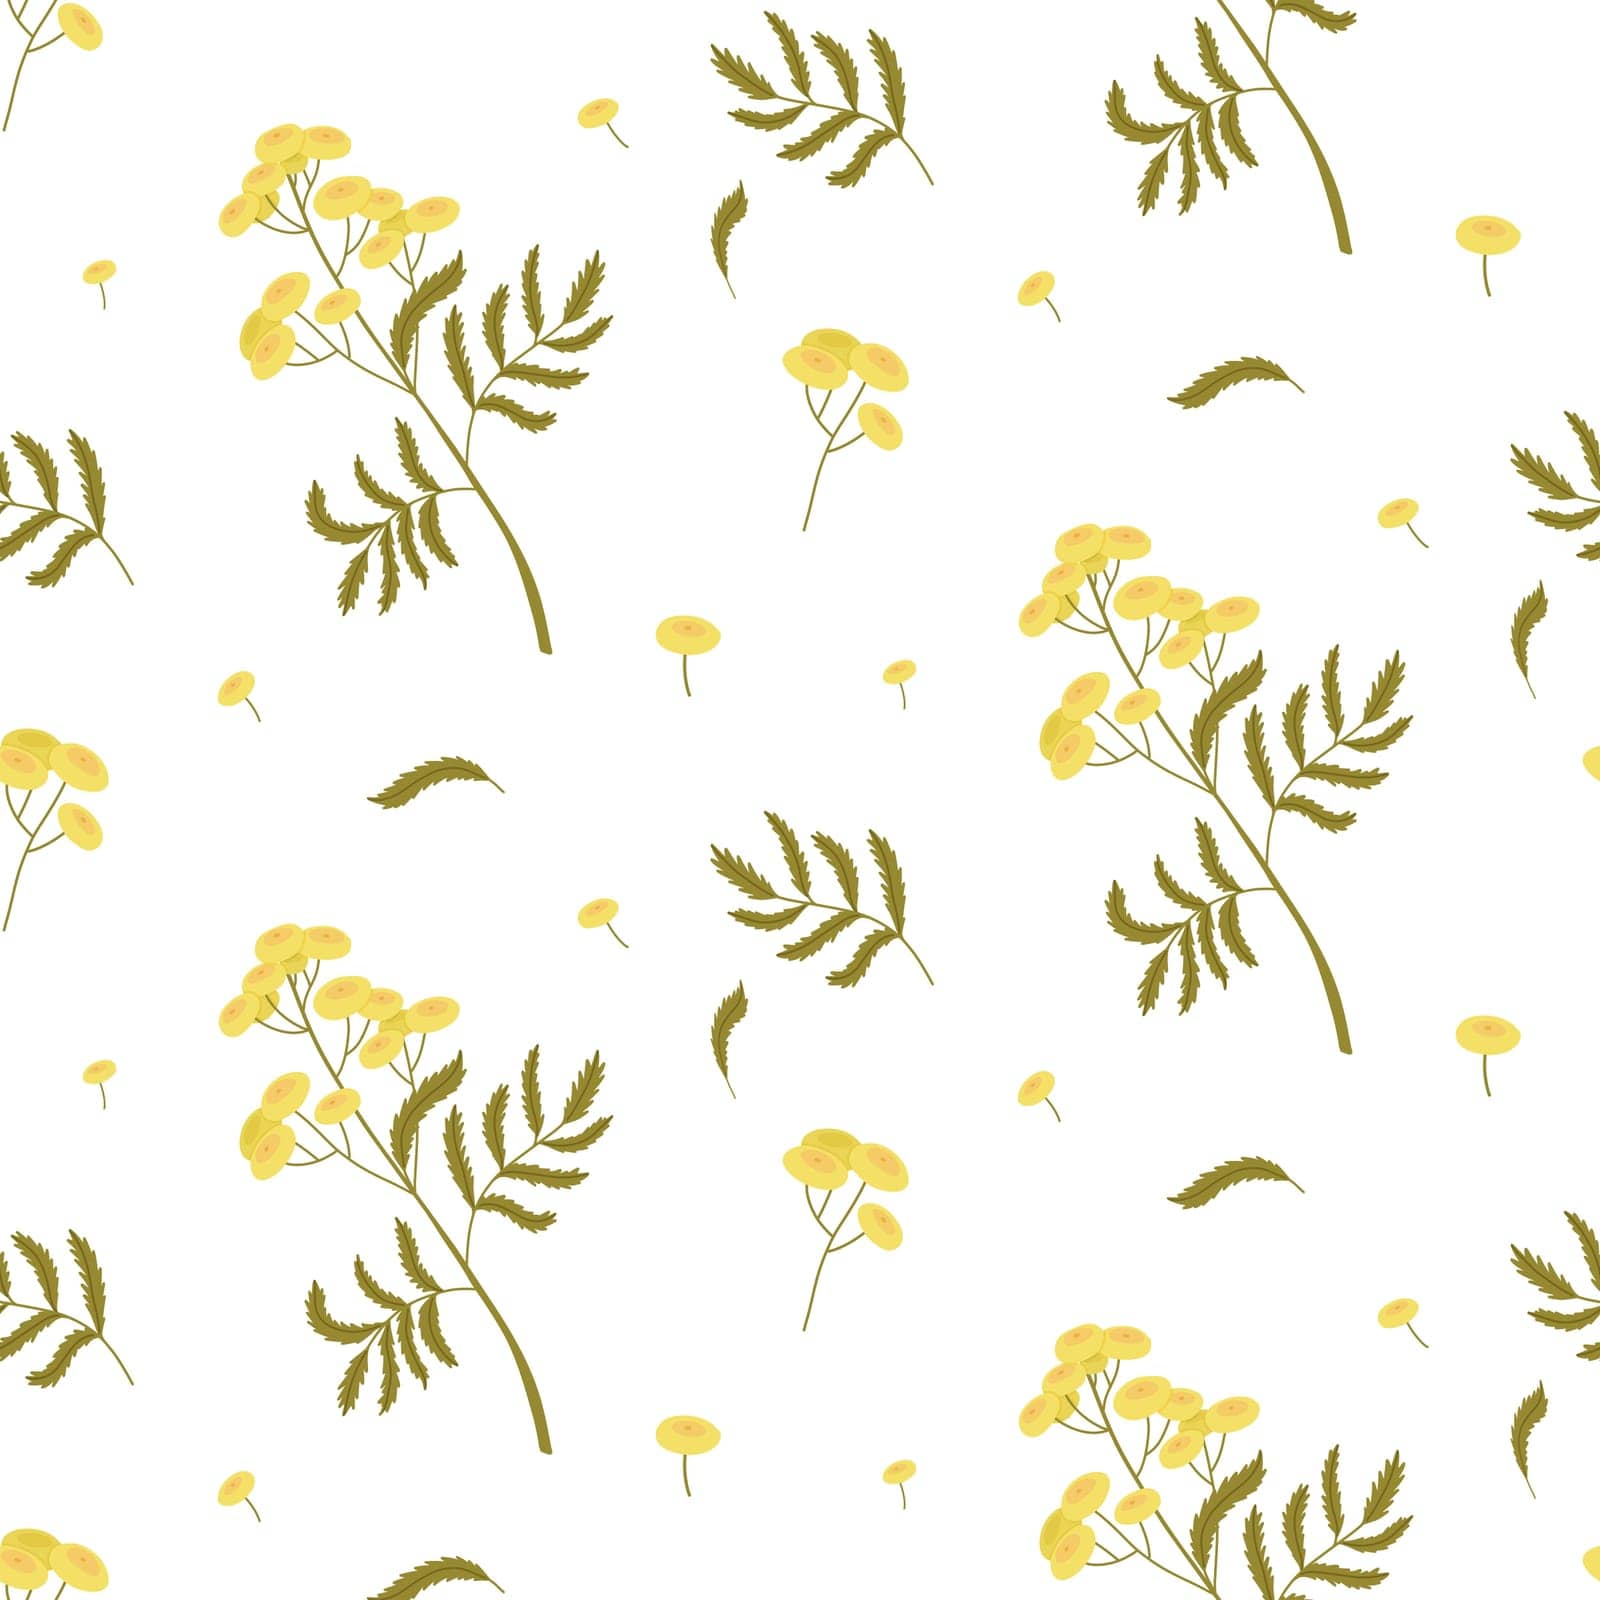 Light seamless pattern with twigs and flowers of tansy on a white background by Senaysky